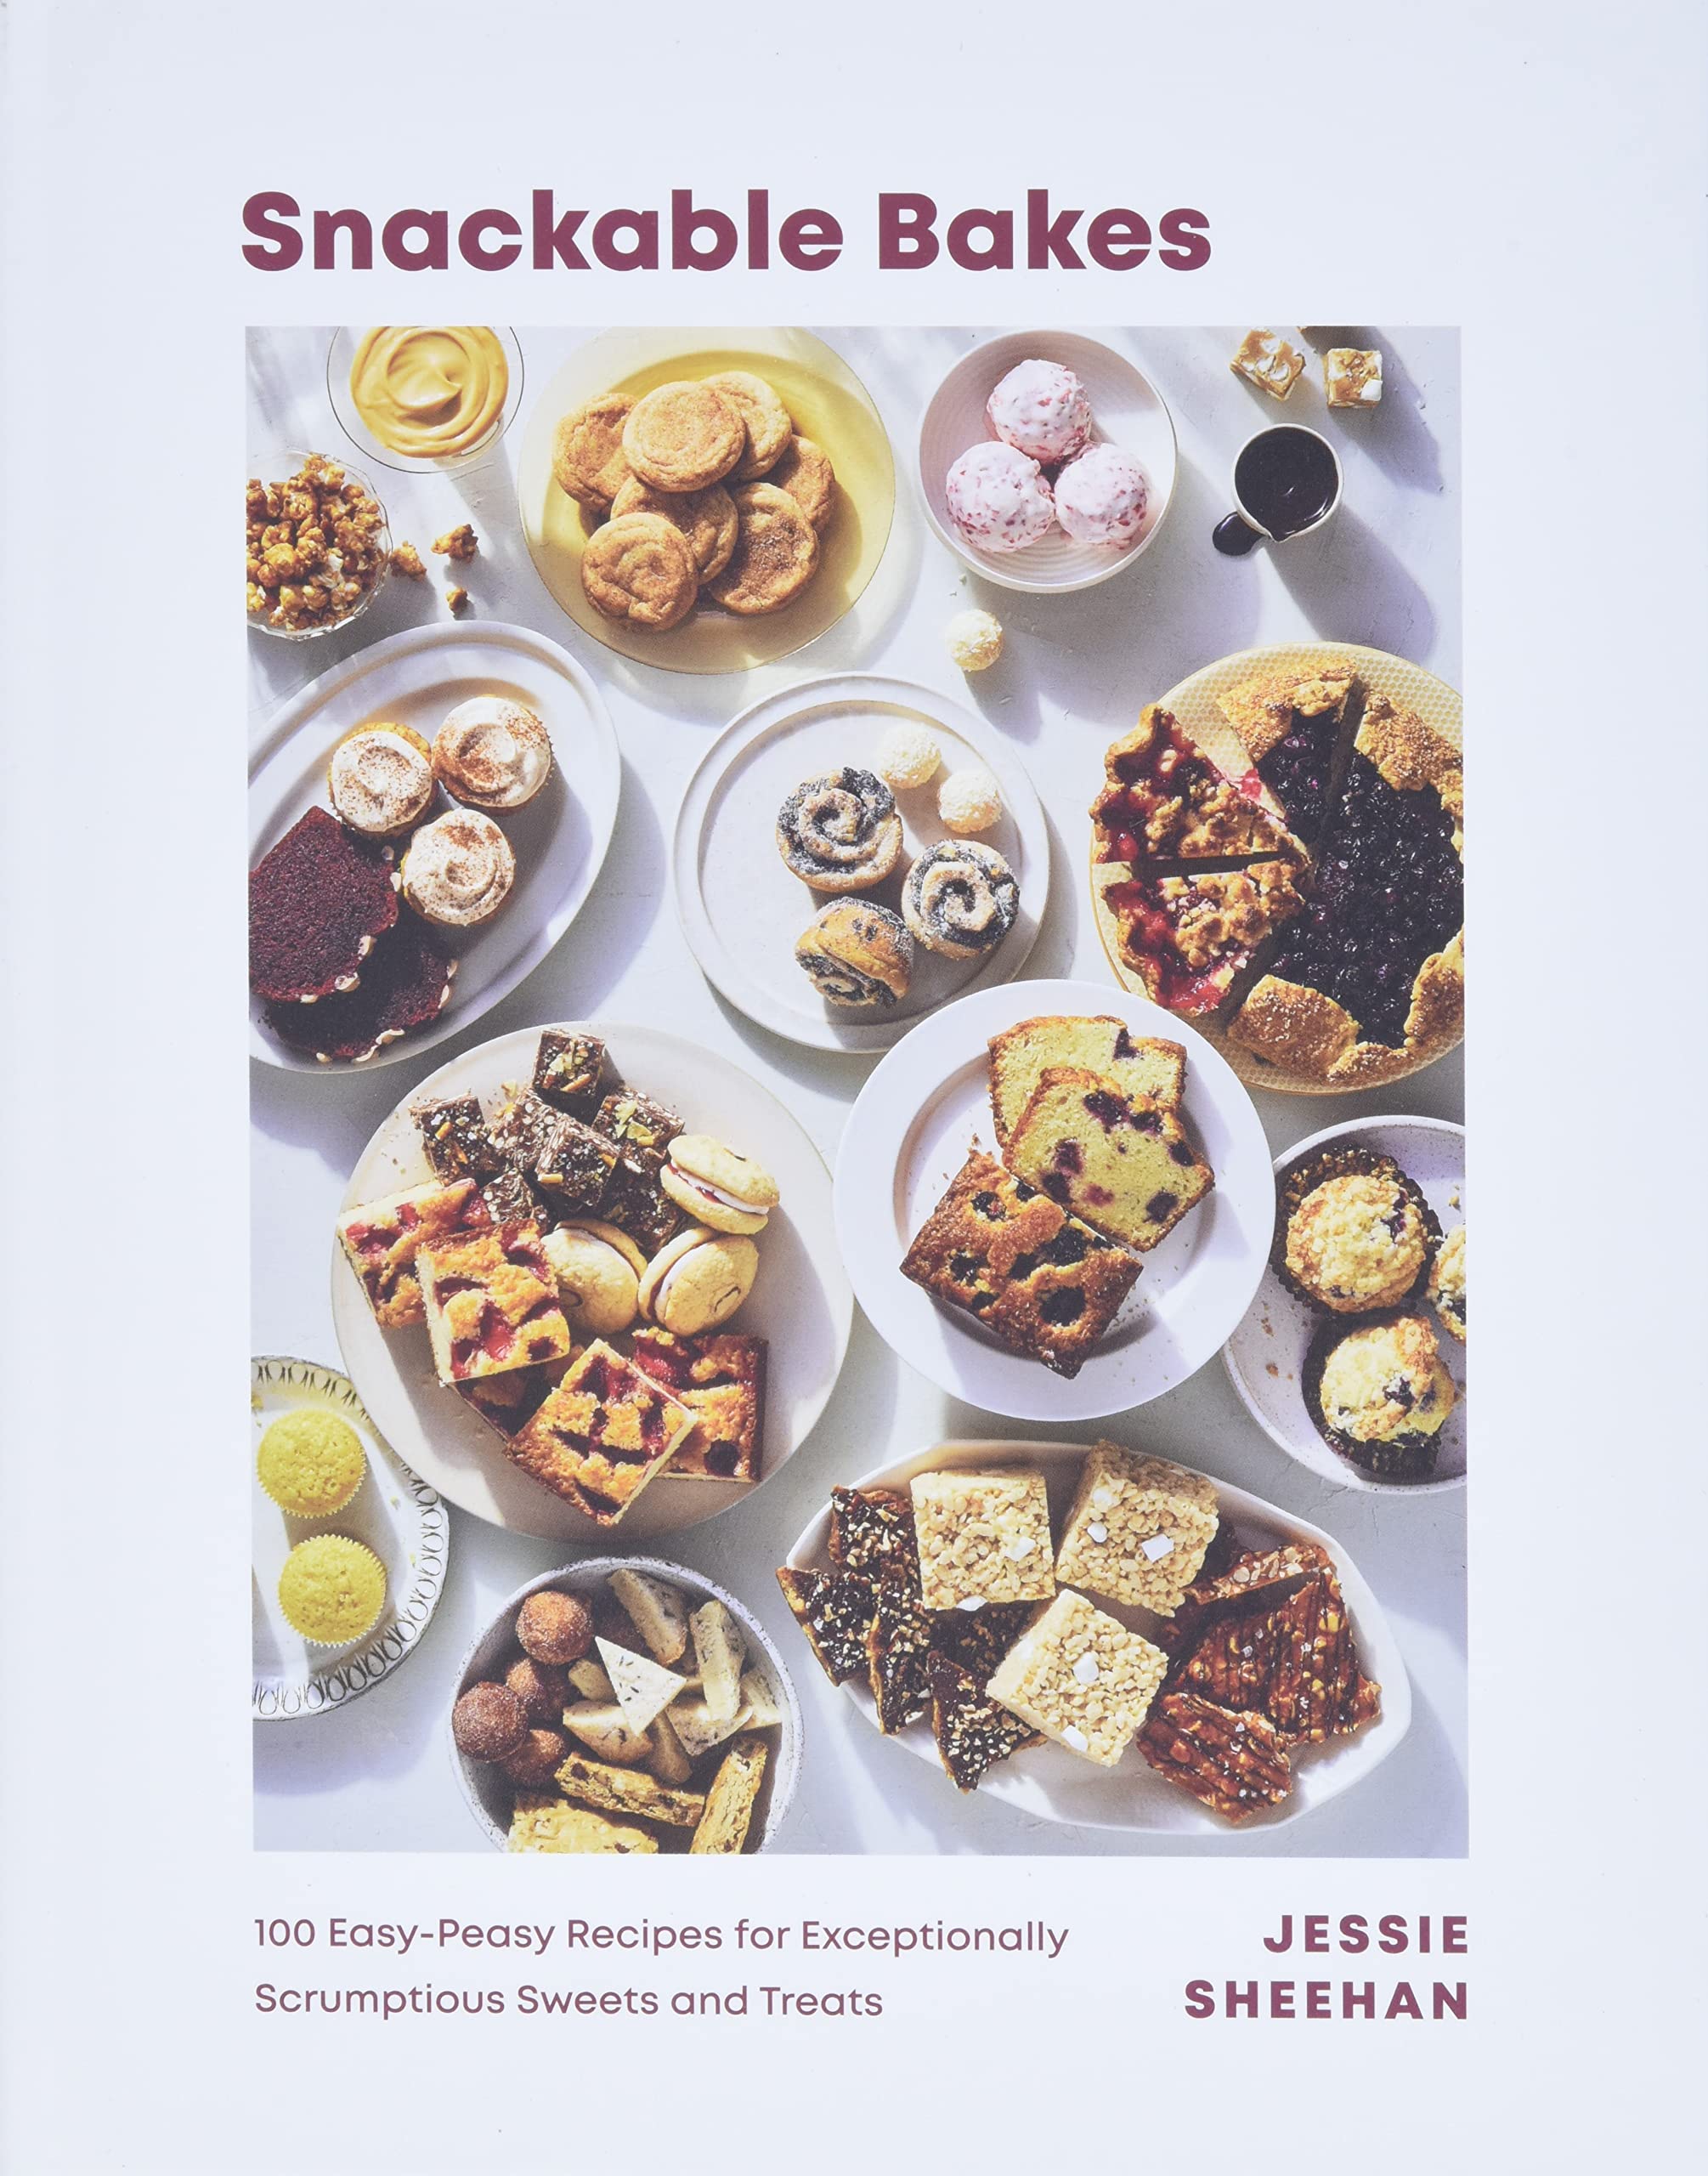 Snackable Bakes: 100 Easy-Peasy Recipes for Exceptionally Scrumptious Sweets and Treats (Jessie Sheehan)